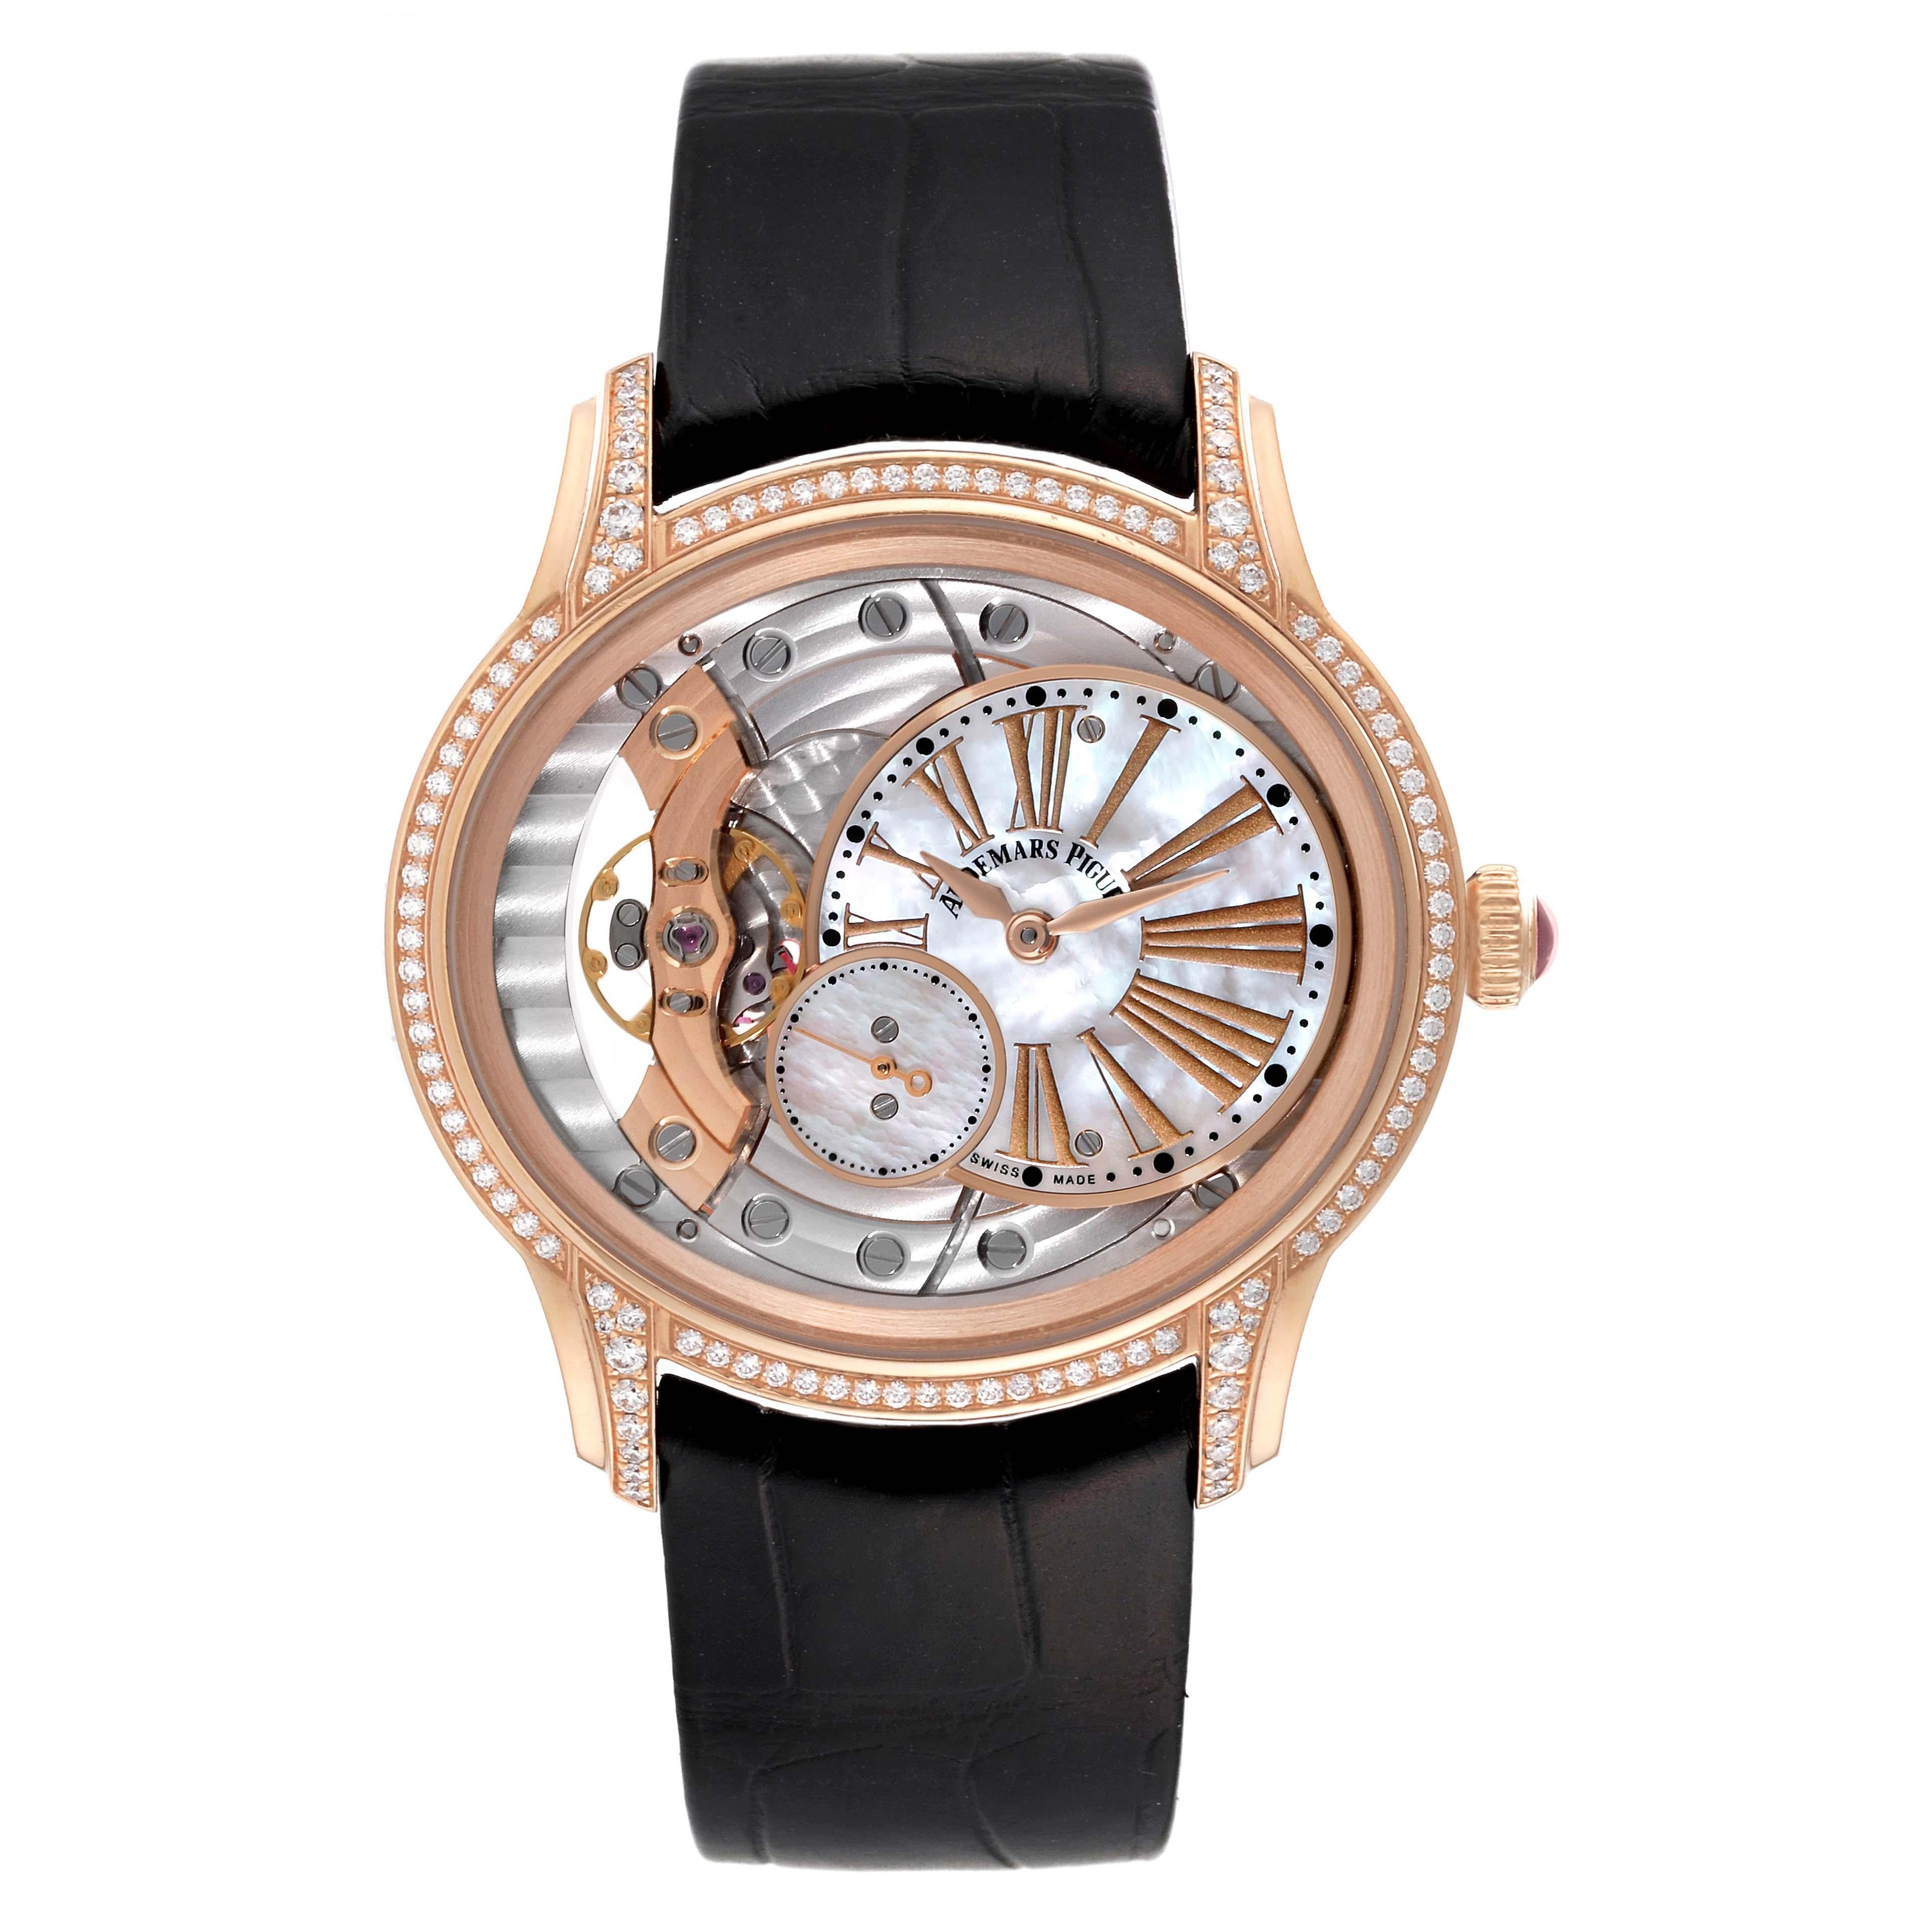 Audemars Piguet Millenary Rose Gold Mother of Pearl Diamond Ladies Watch 77247OR. Manual-winding movement. 18k rose gold oval case 39.5 mm. Case thickness 9.8mm. Transparent exhibition sapphire crystal case back. Original Audemars Piguet factory